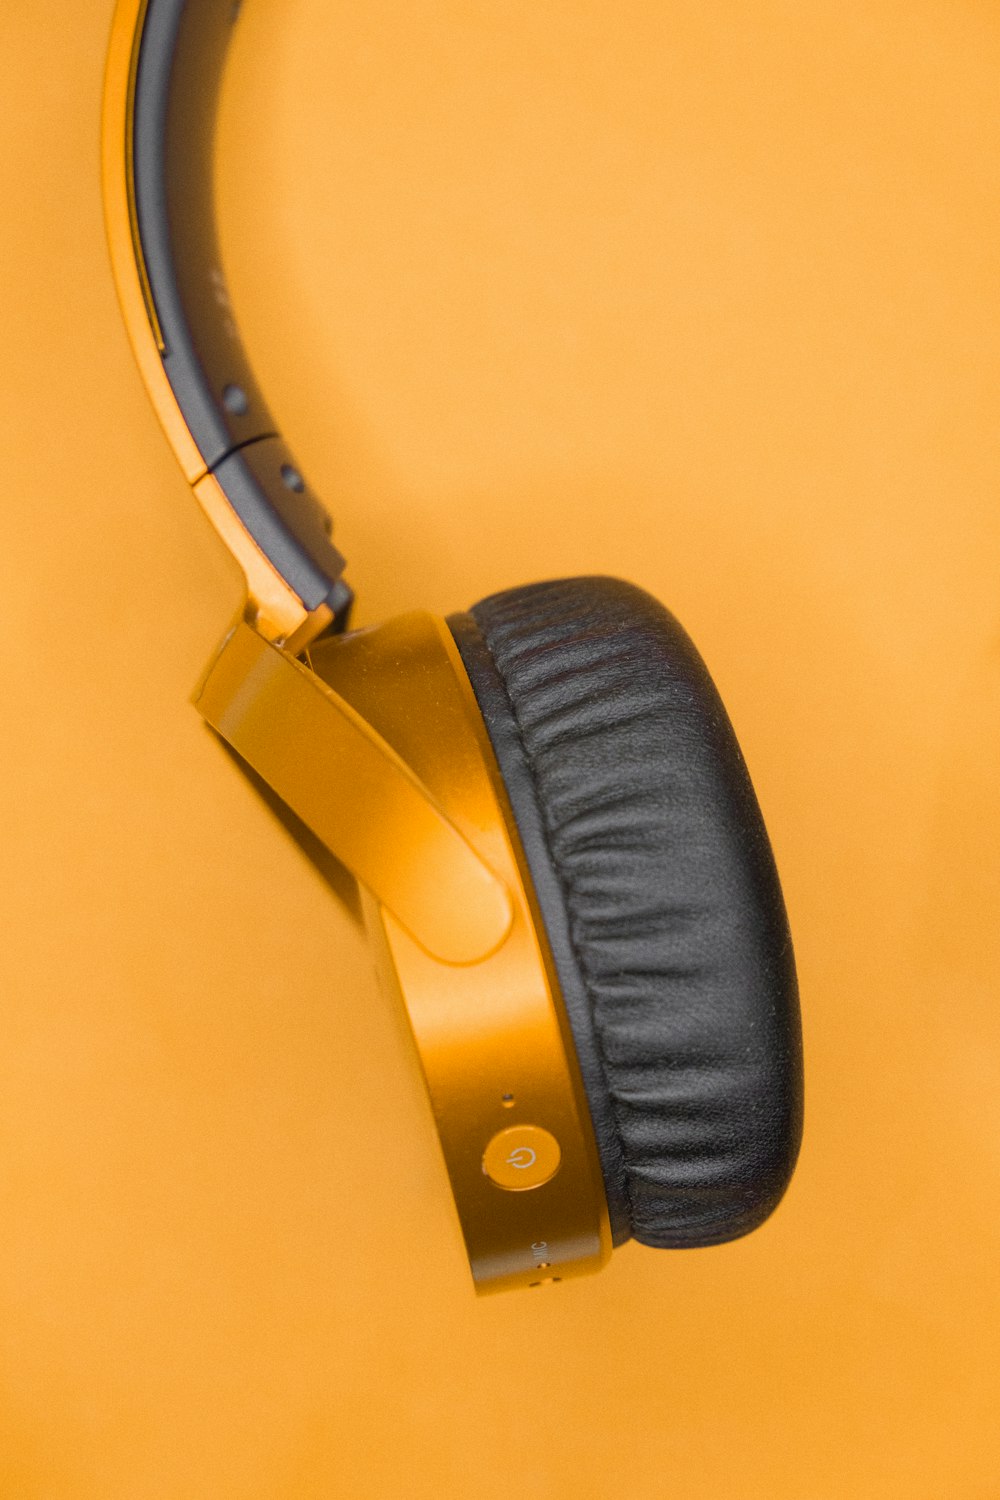 a pair of headphones sitting on top of a yellow surface